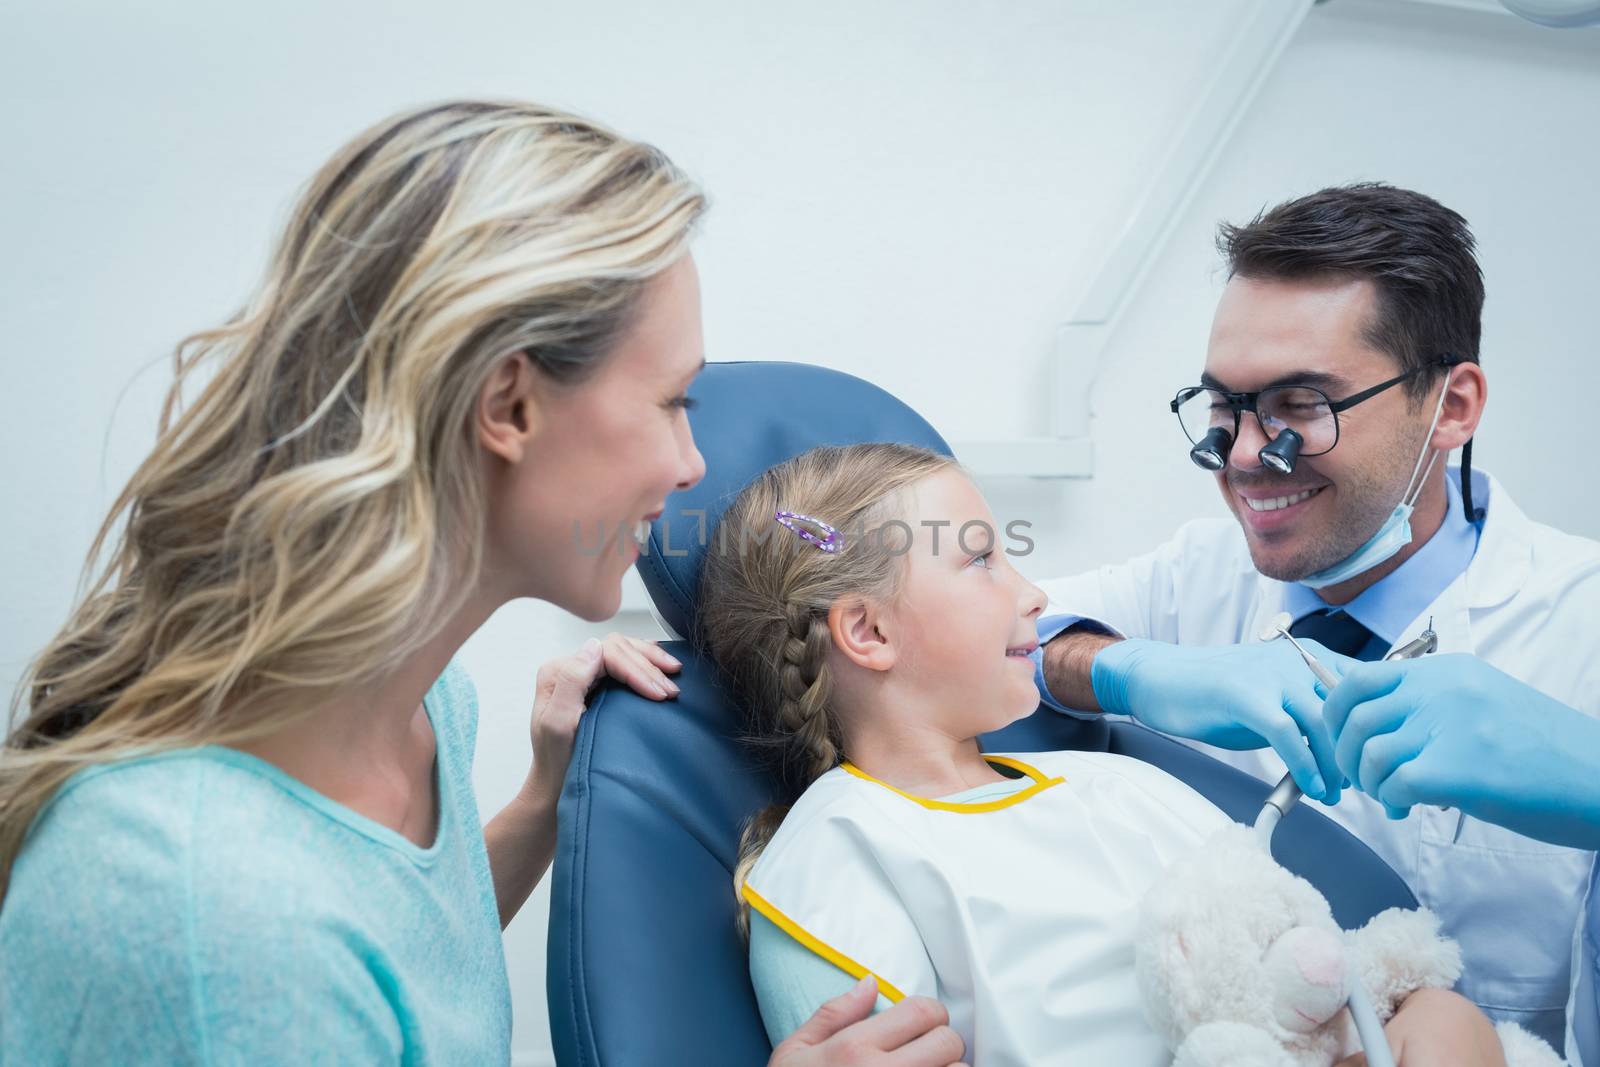 Dentist examining girls teeth in the dentists chair with assistant